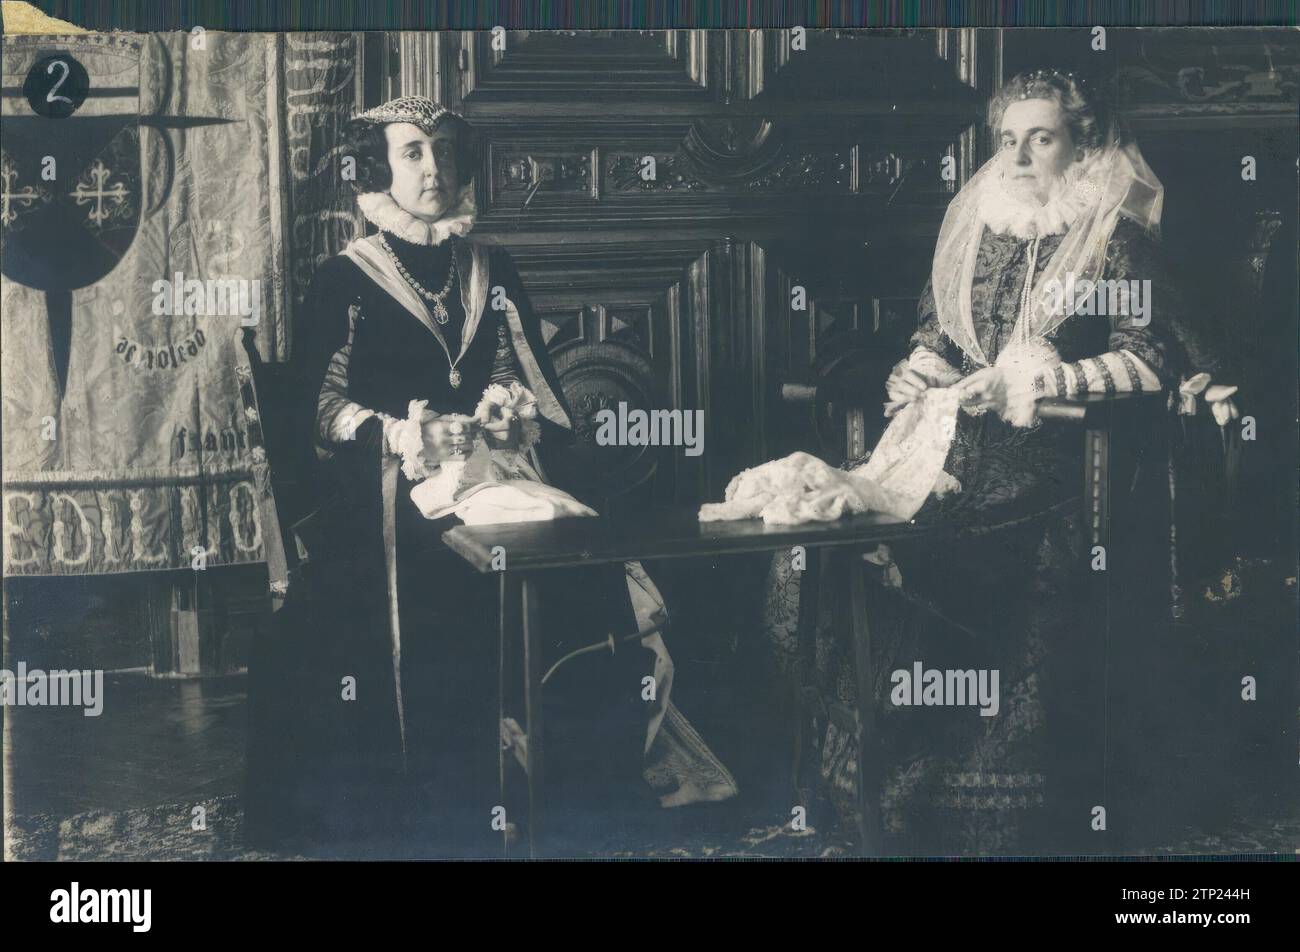 09/14/1919. Saint Sebastian. Theatrical performance in the palace of the Dukes of Infantado. A scene from the Drama 'There is no death like Oblivion'. Credit: Album / Archivo ABC / Martín Stock Photo